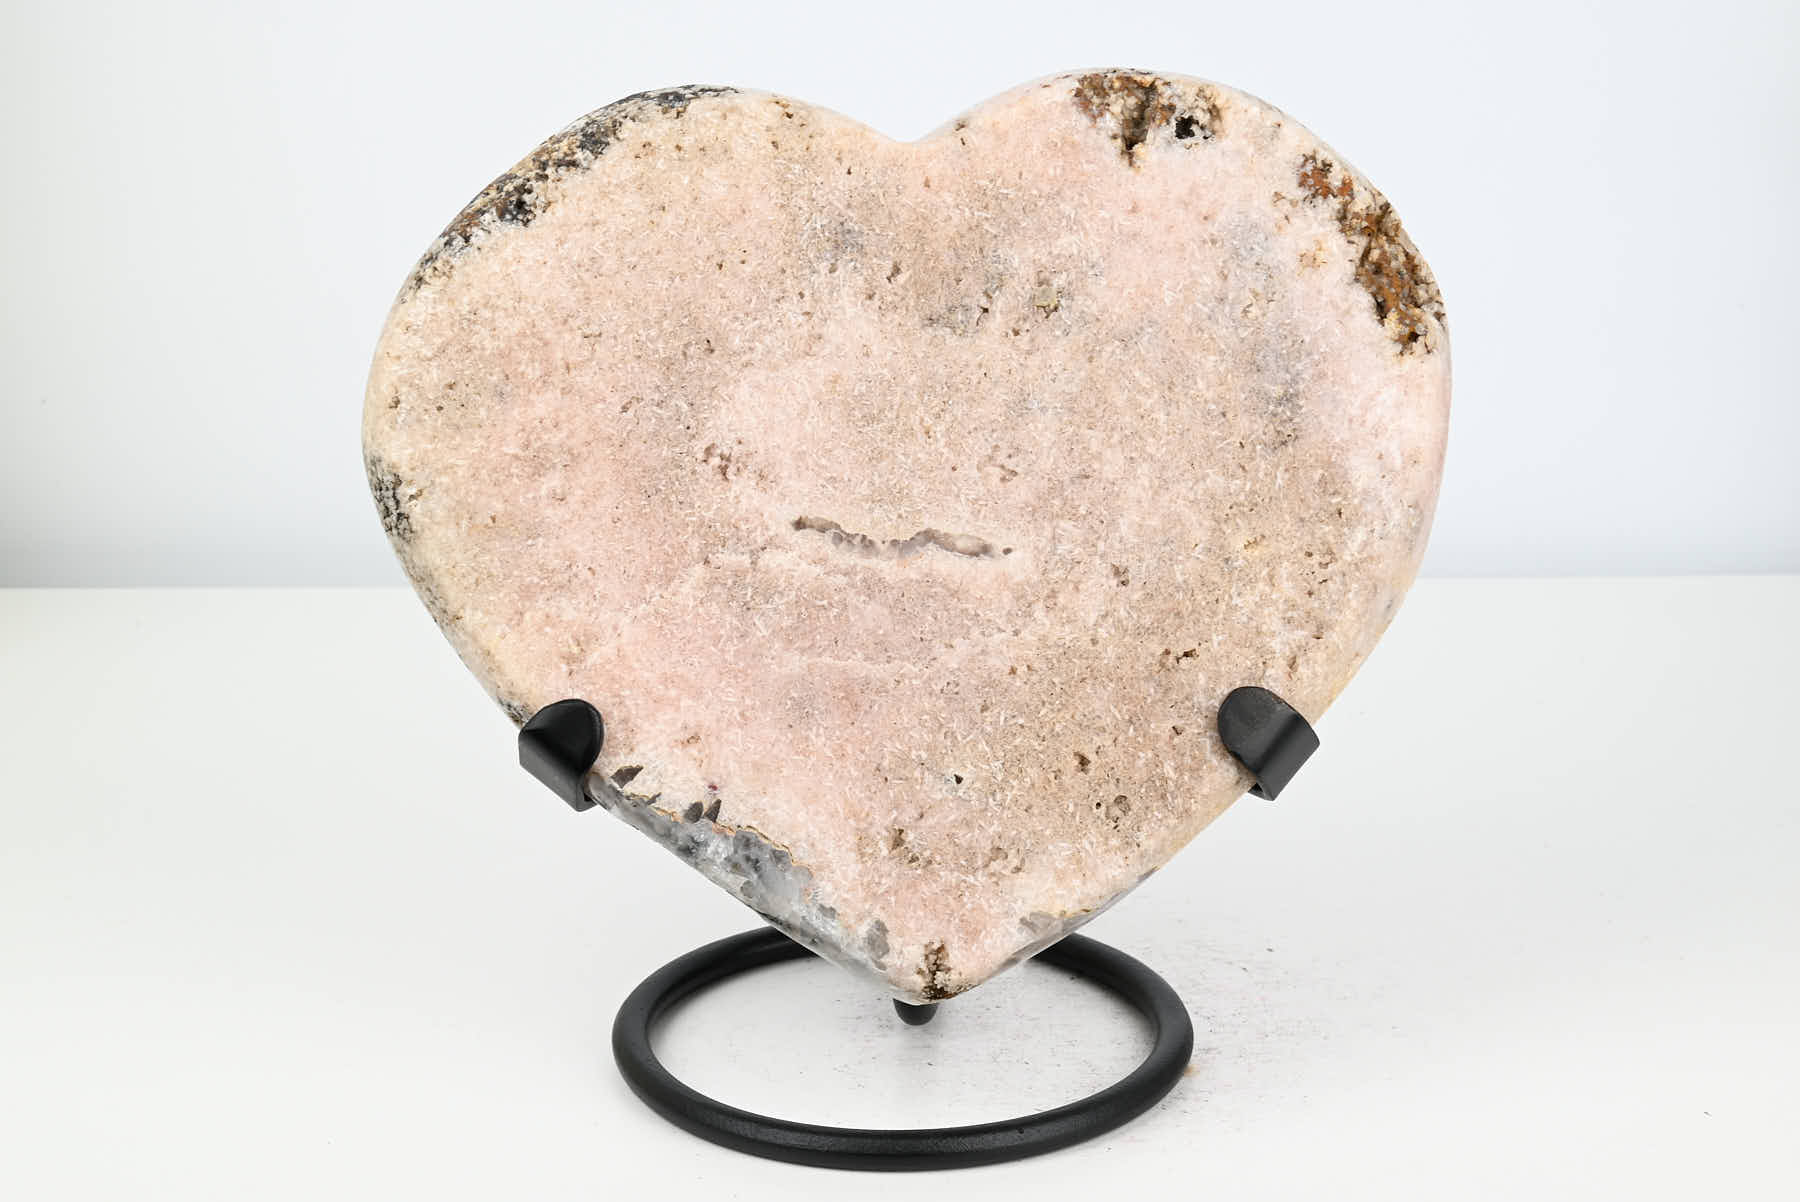 Extra Quality Pink Amethyst Heart - 2.52kg, 22cm high - #HTPINK-34002